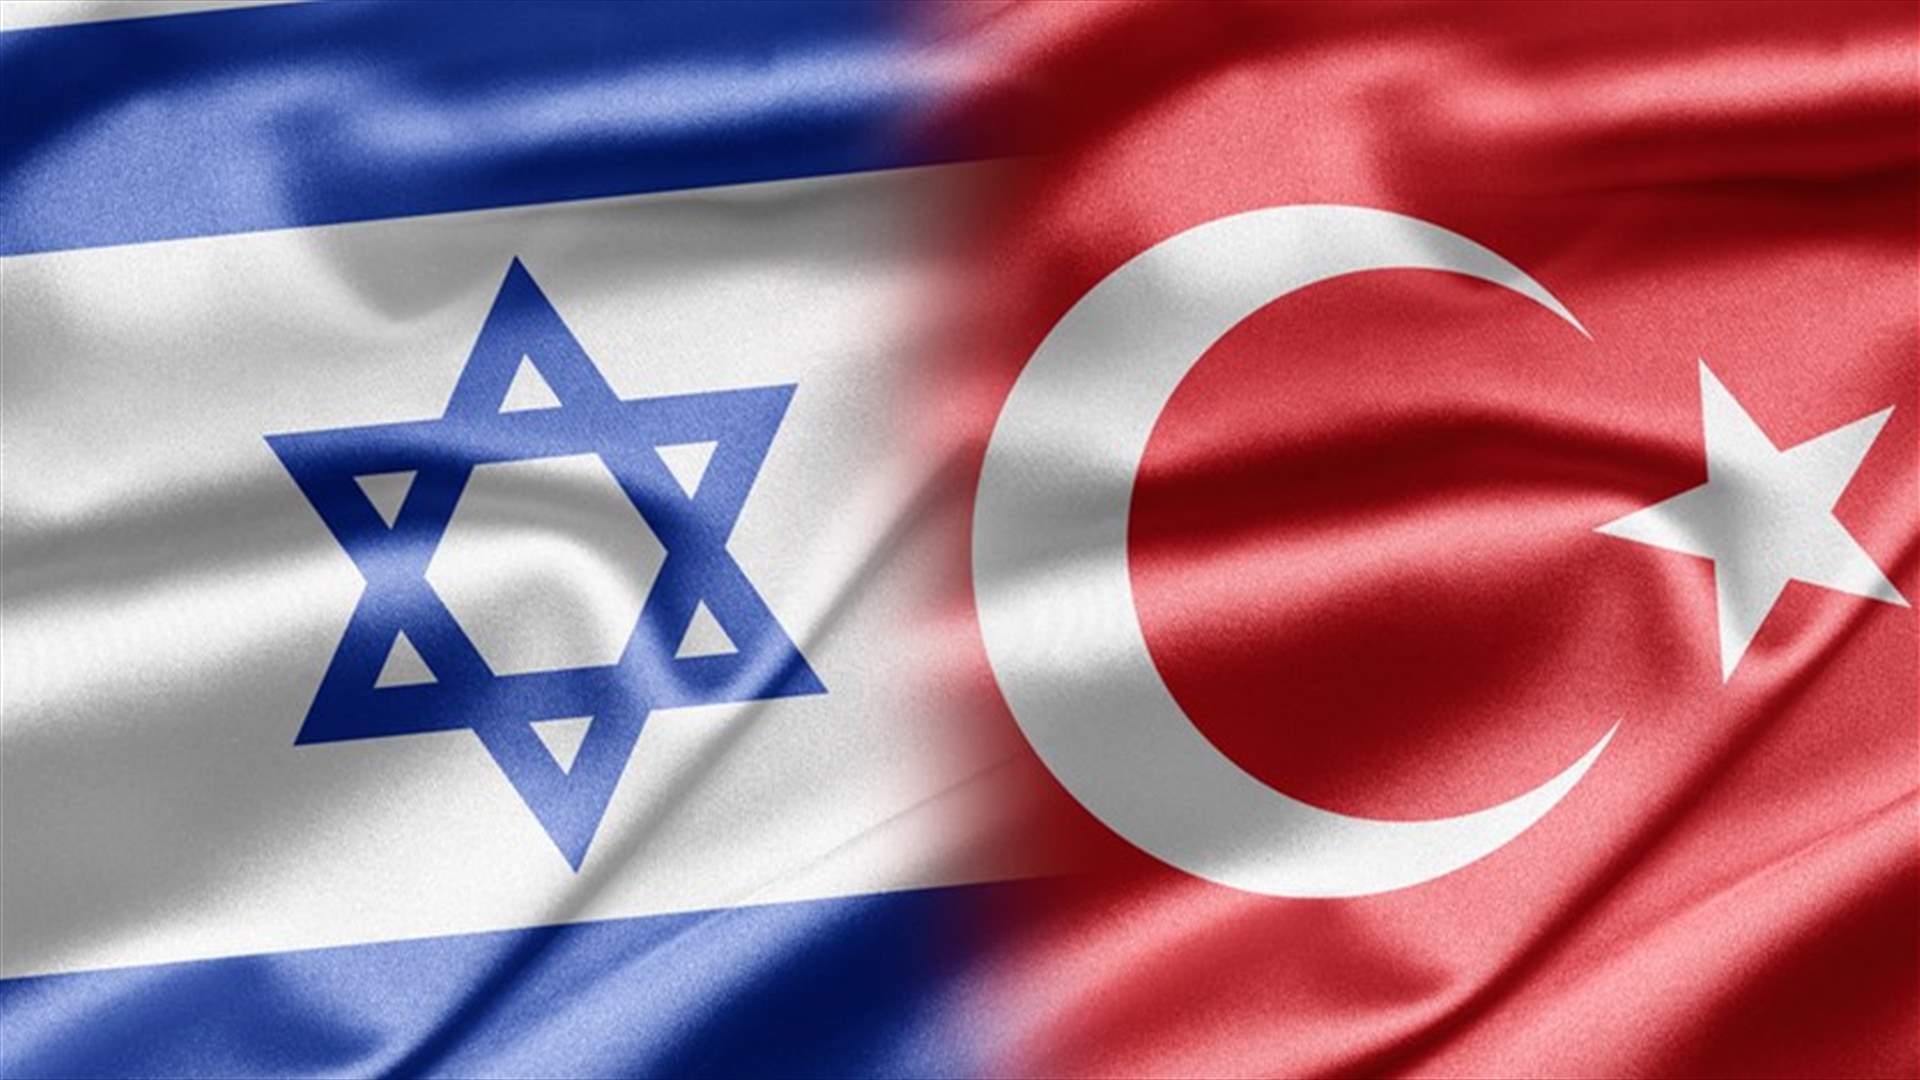 Turkey signs deal to normalize ties with Israel - official